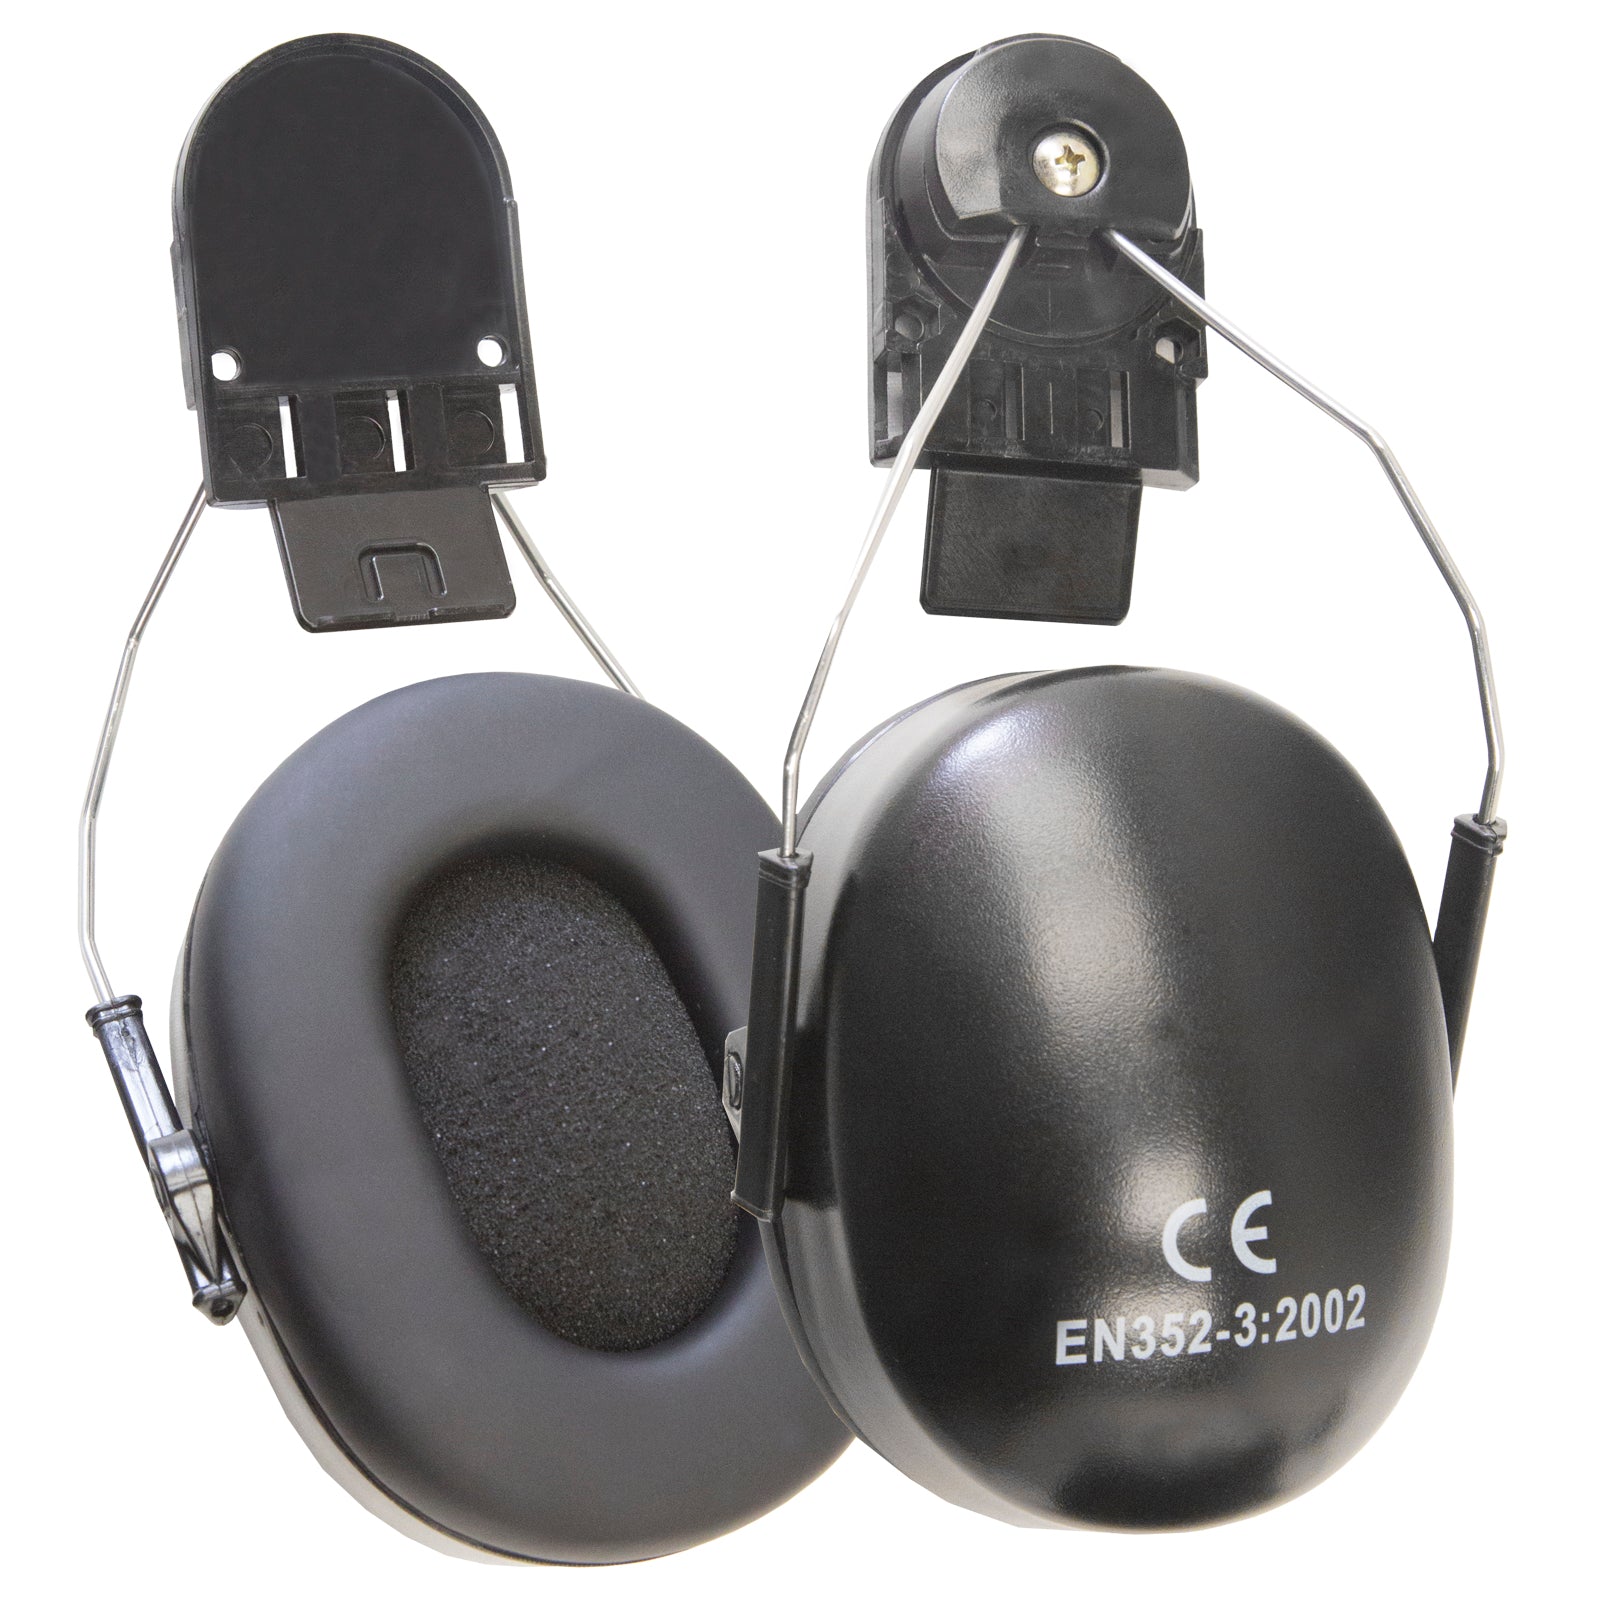 Ear muffs for earing protection. Accessories for  cap style hard hats.